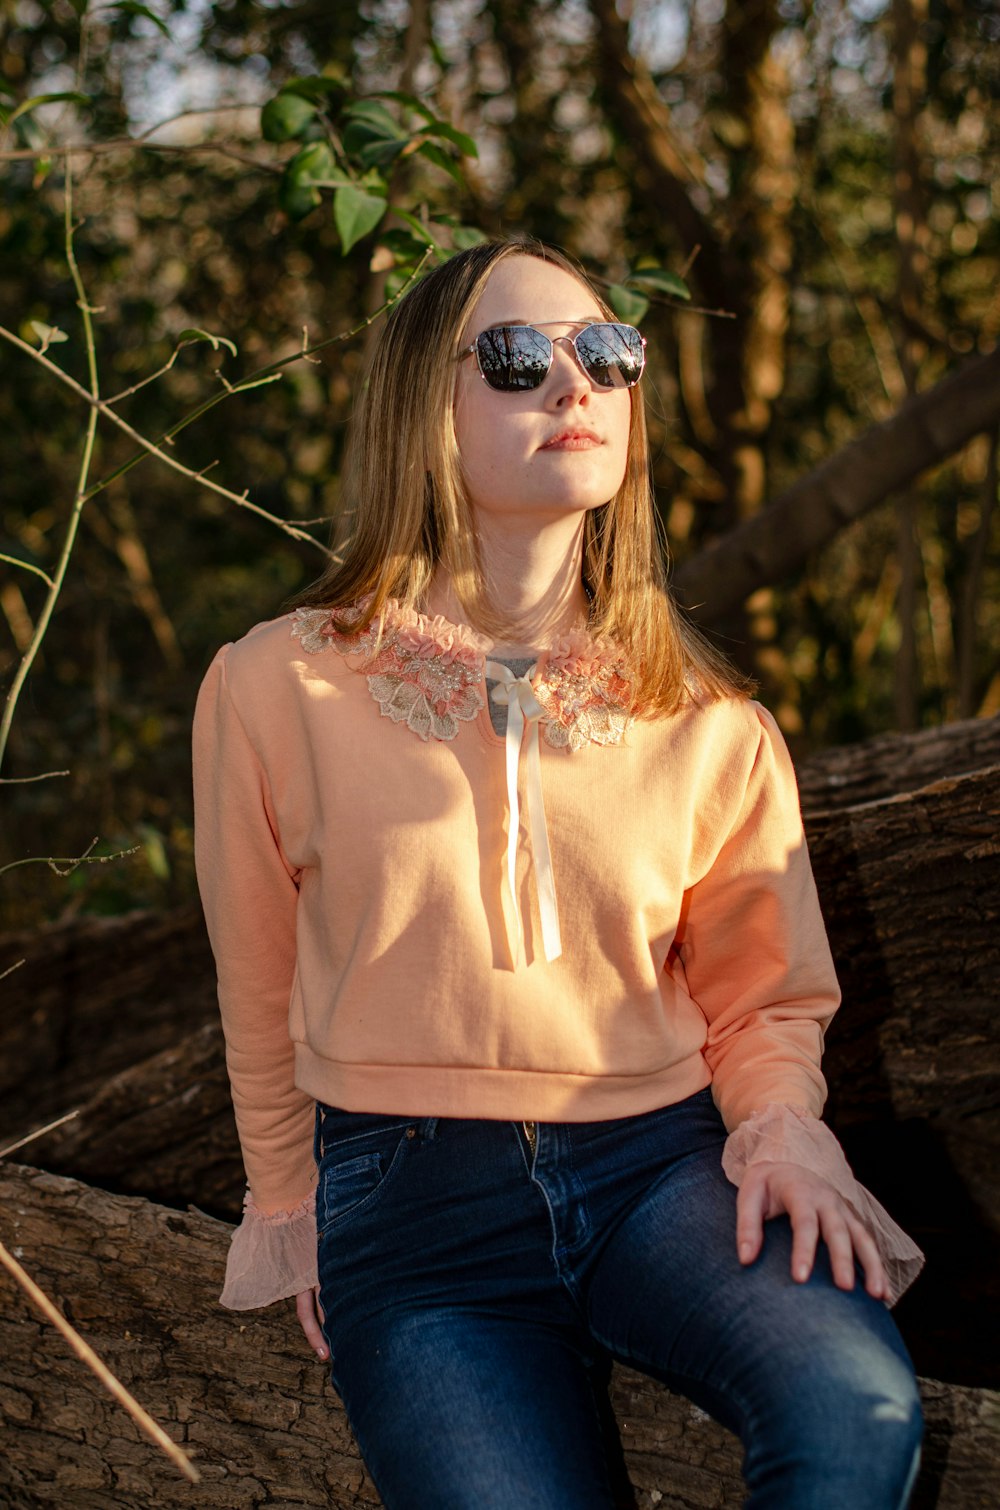 a woman sitting on a tree branch wearing sunglasses